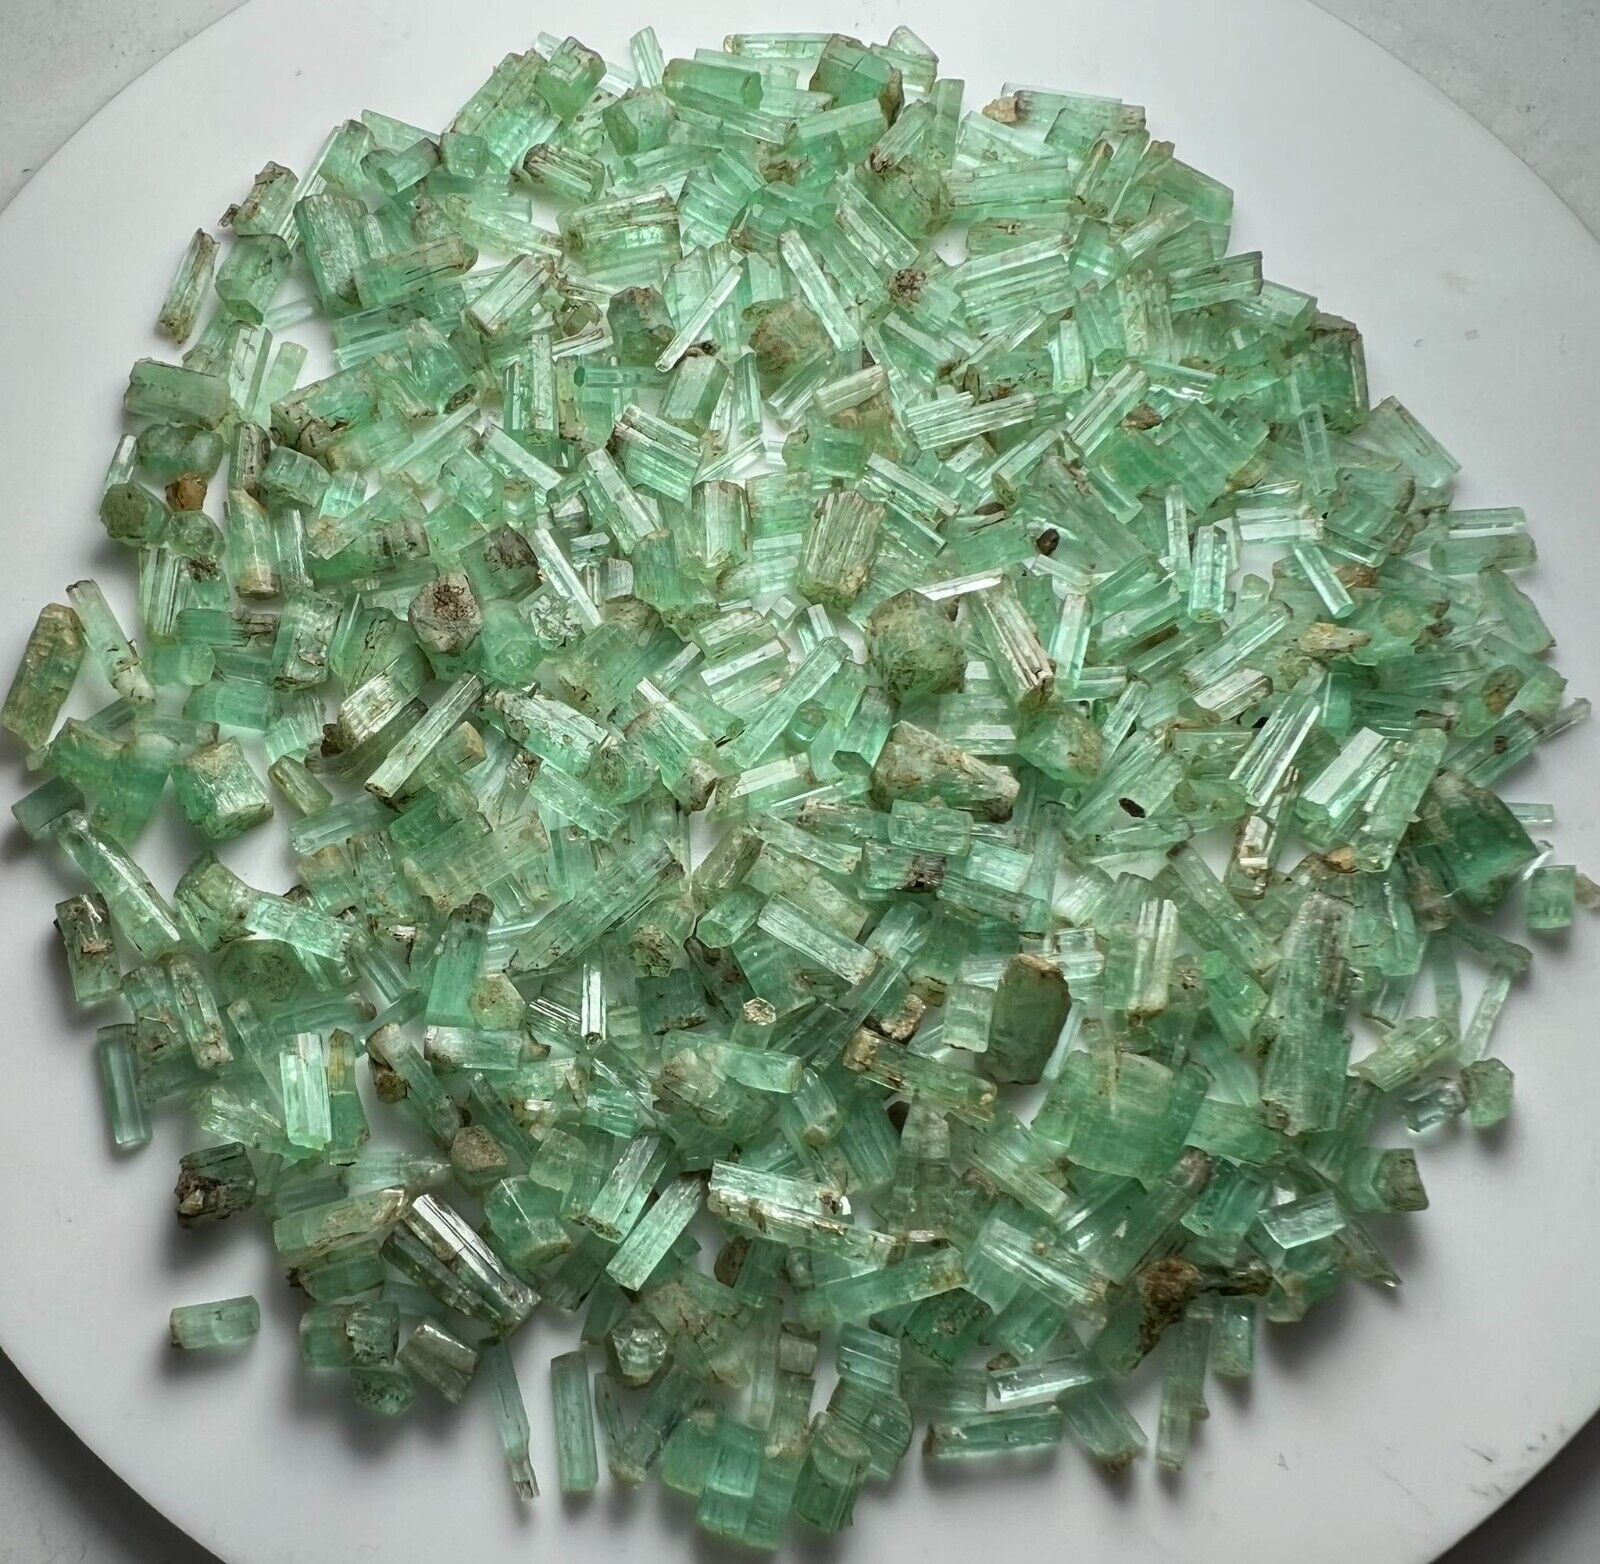 260 CT Light Green Panjshir Emerald Small Crystals Lot From Afghanistan